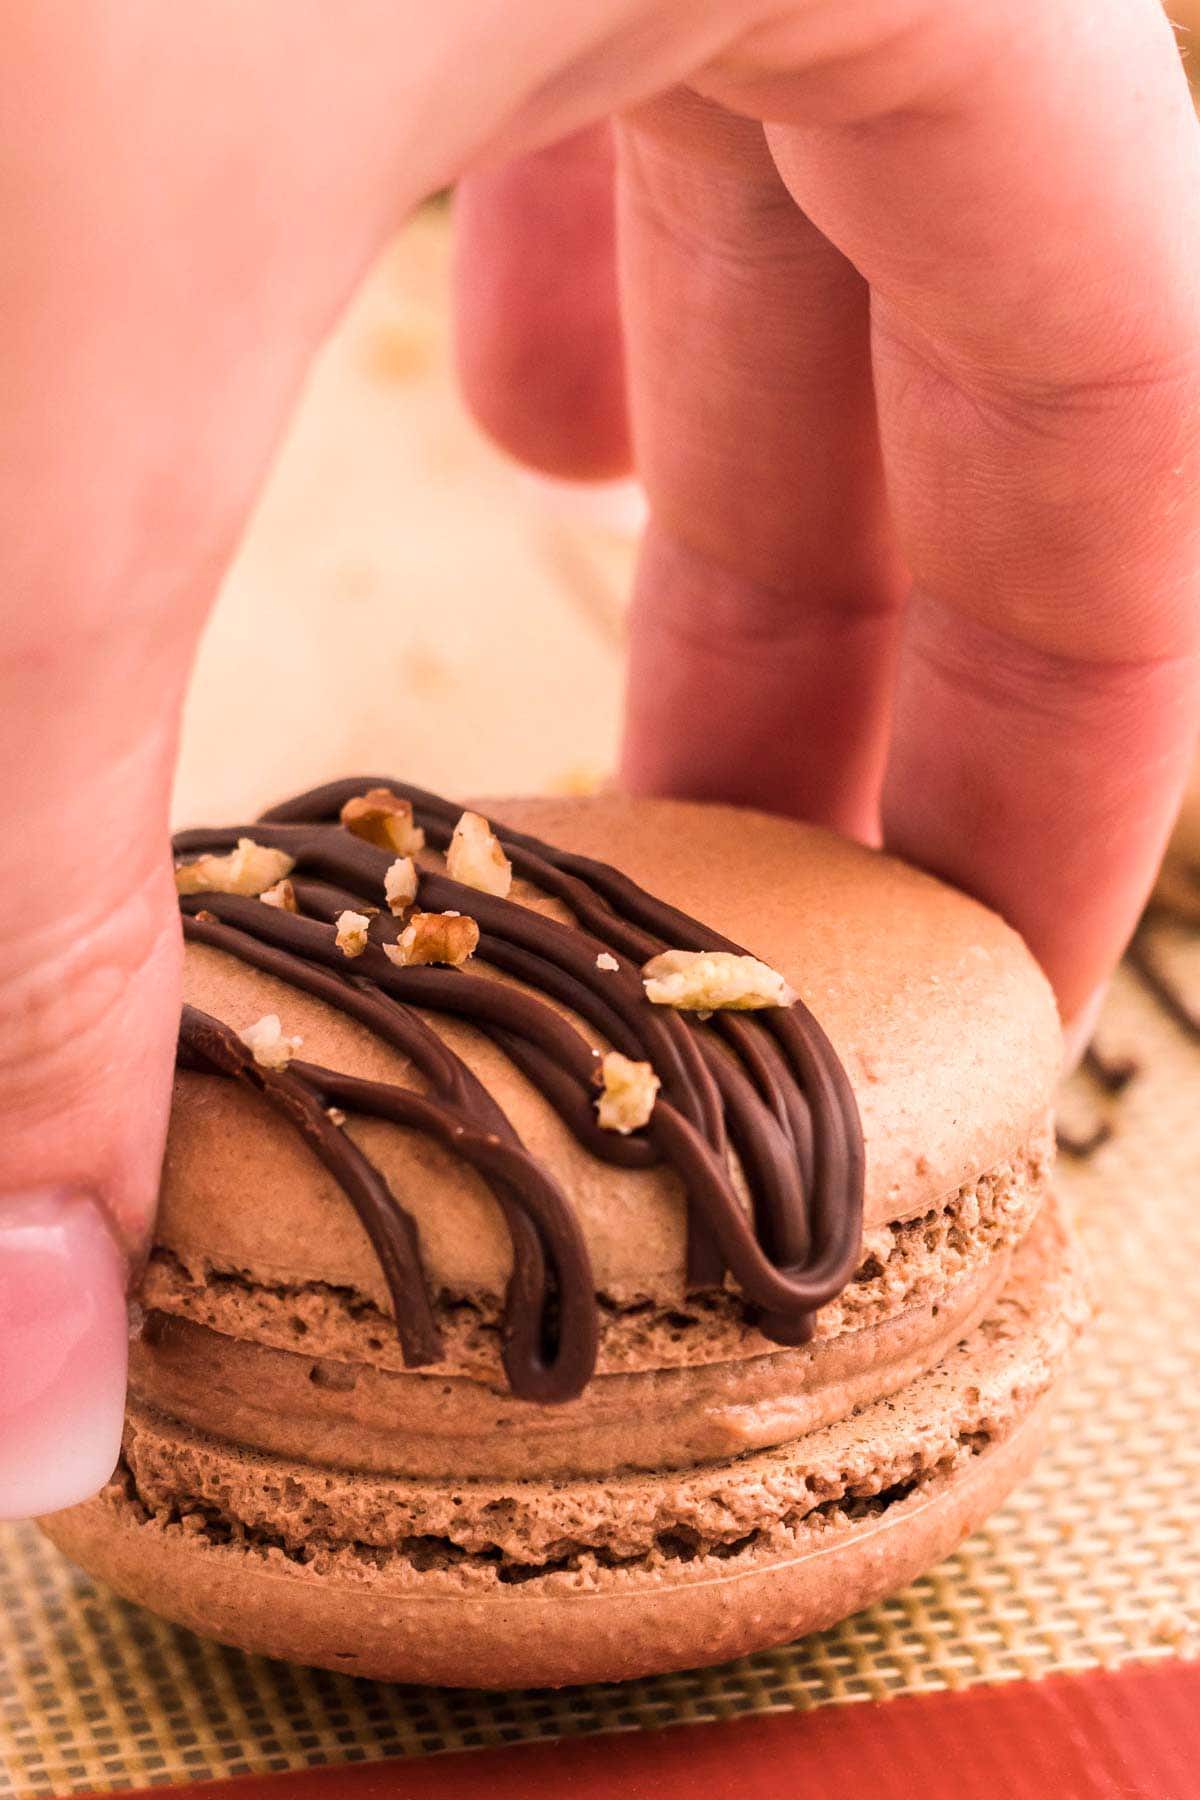 A hand holding a chocolate macaron, a close up picture